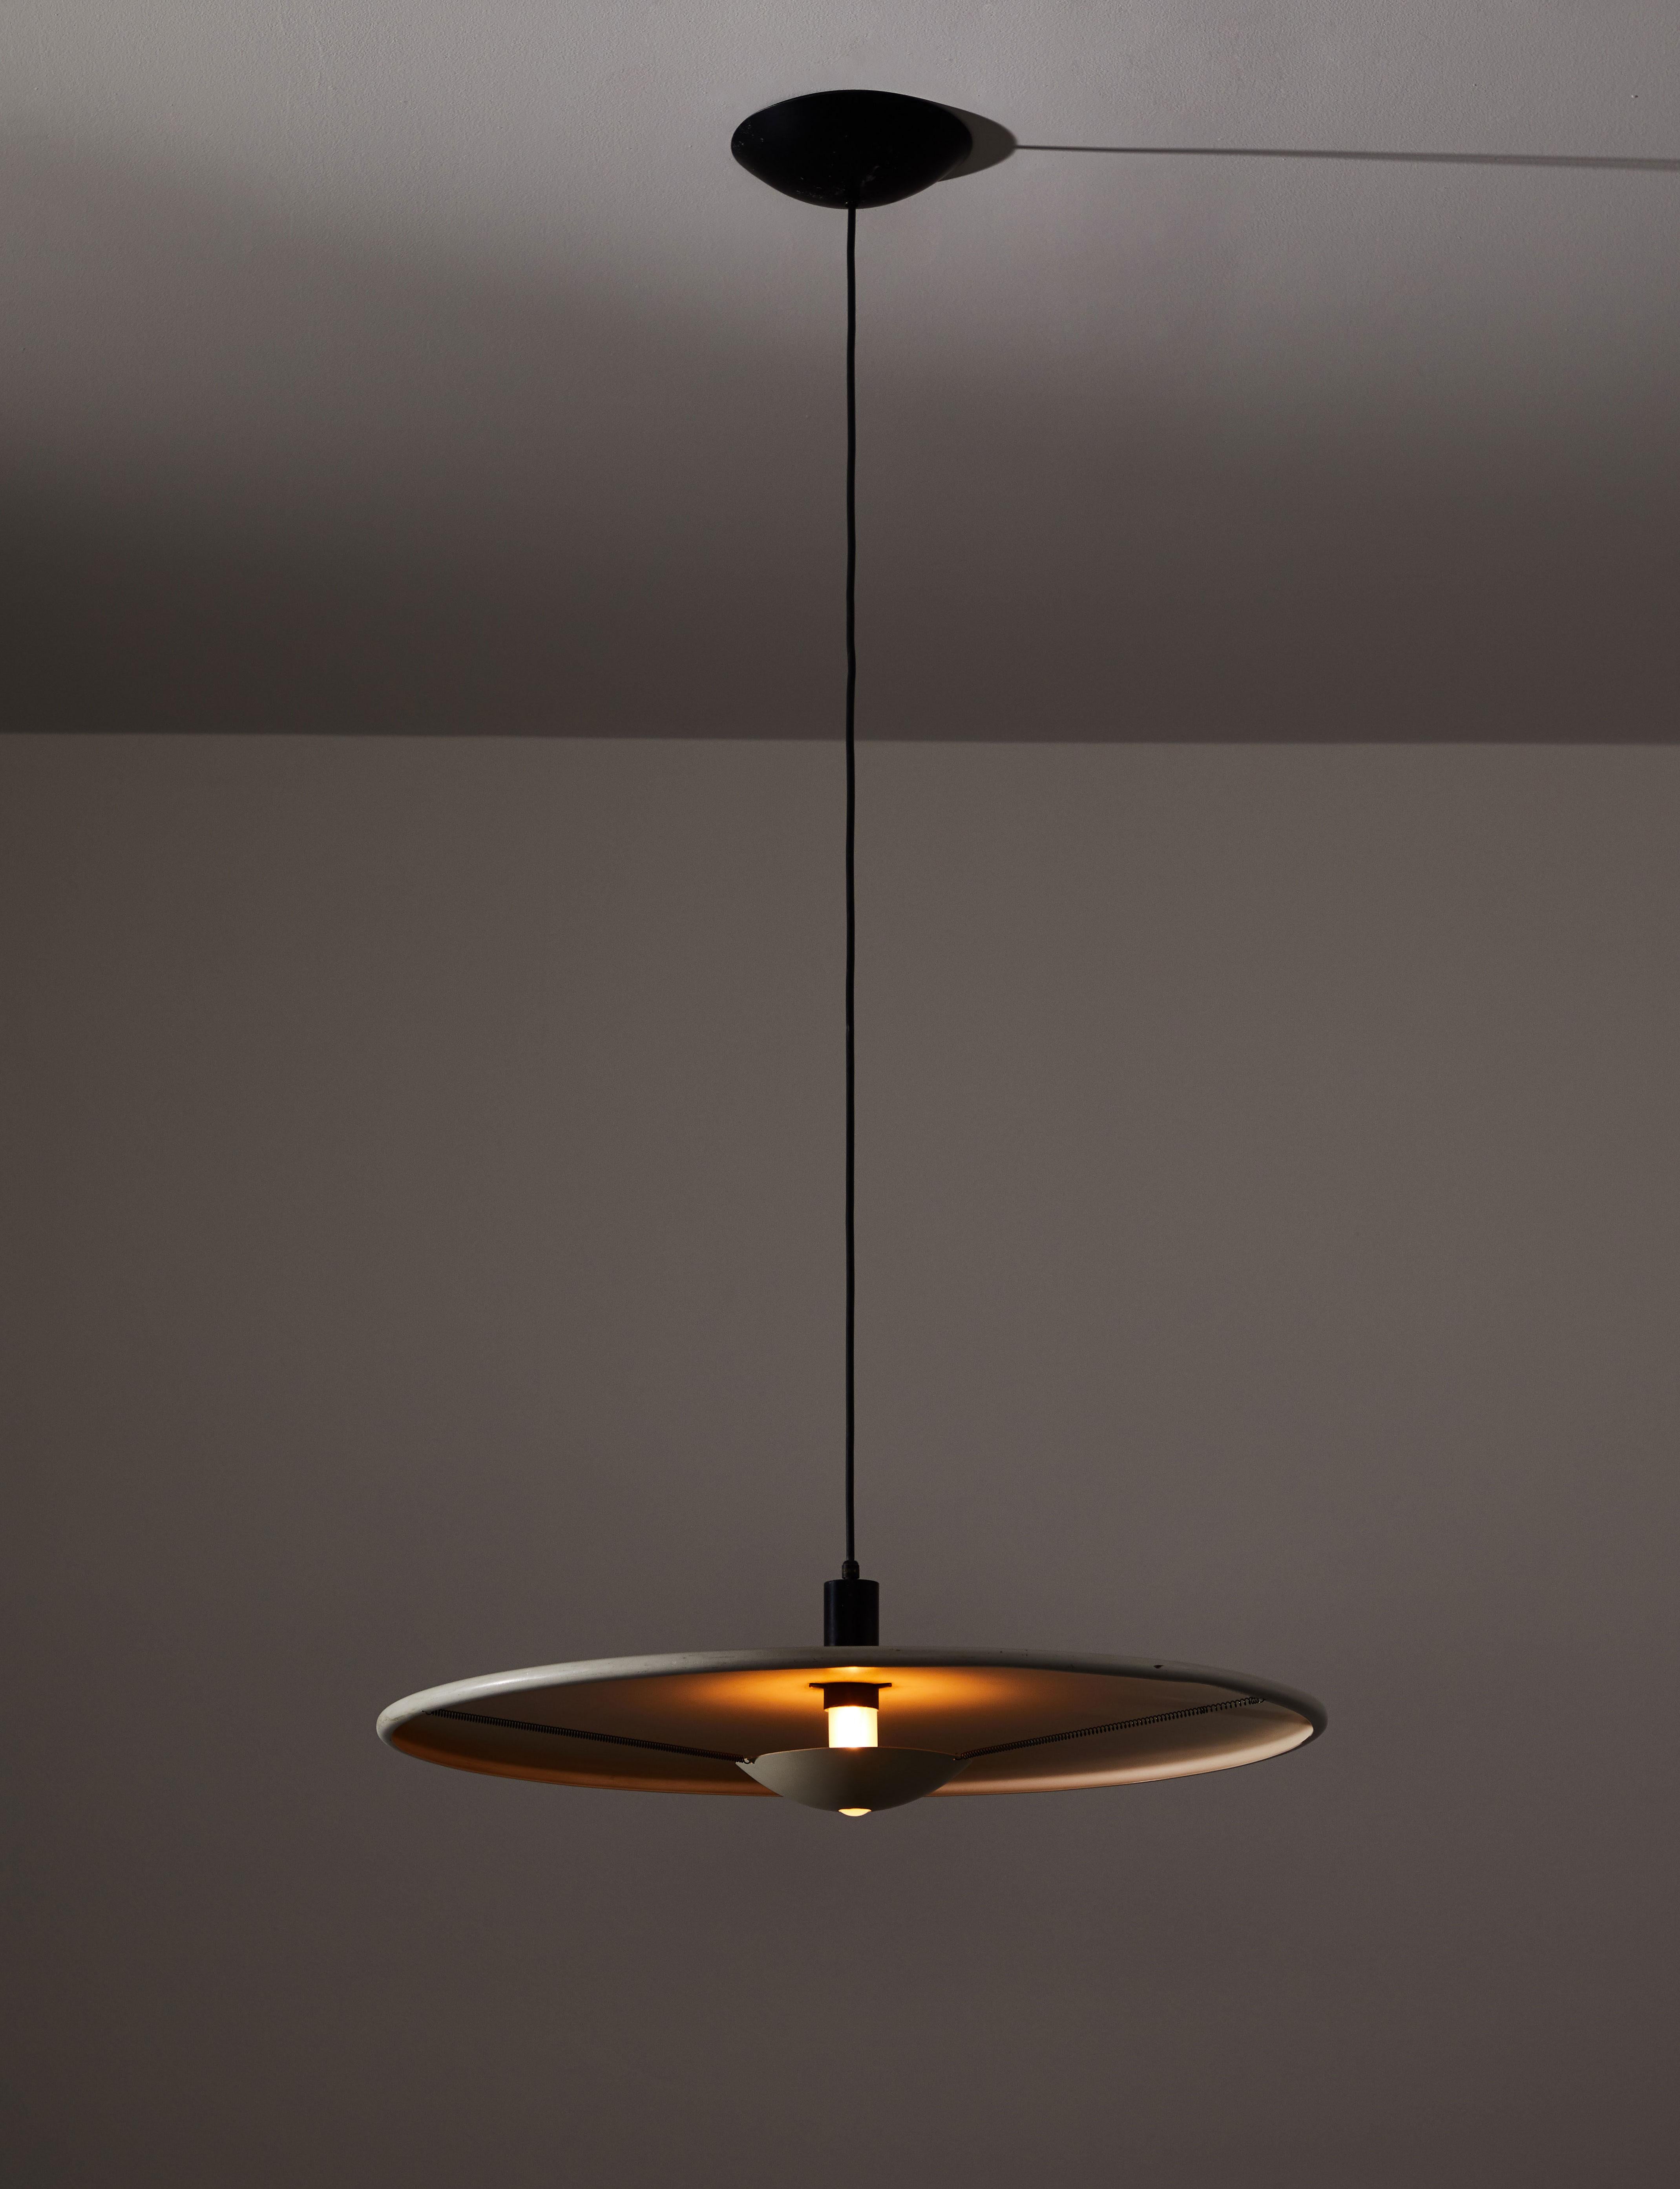 Minimalist suspension light by Marco Colombo and Mario Barbaglia. Designed and manufactured in Italy, circa 1980s. Enameled Aluminum. Rewired for US junction boxes. Original canopy. Takes one E26 75w maximum bulb. Bulbs provided as a one time